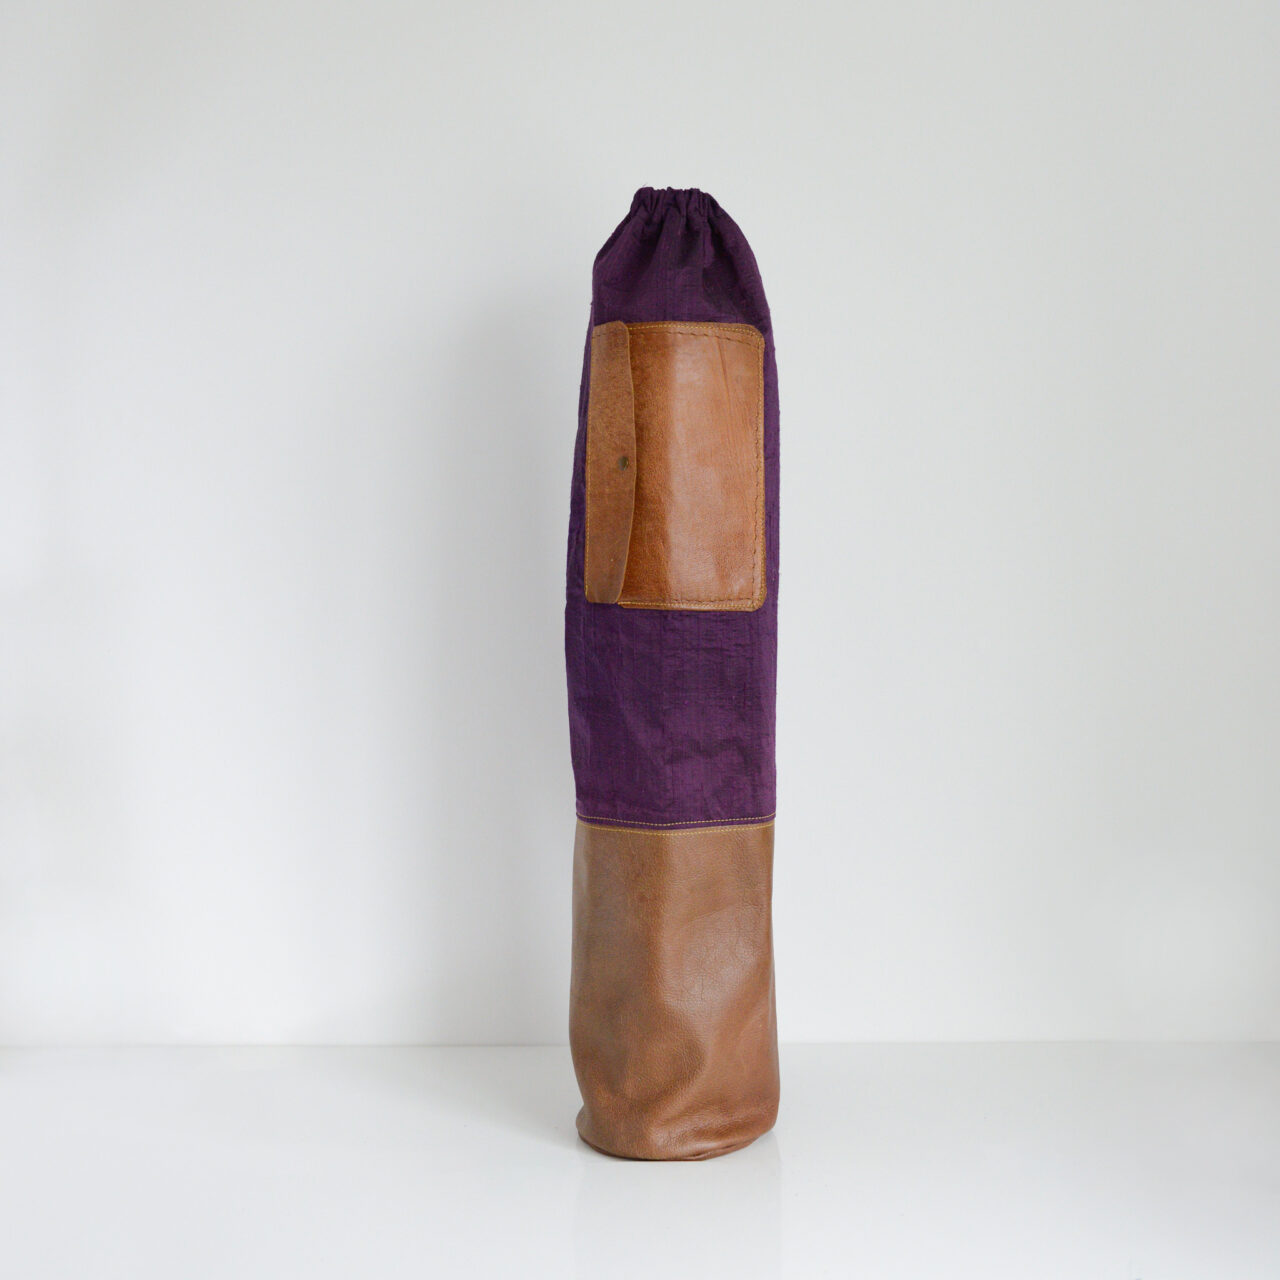 Yoga mat bag made from upcycled leather and reclaimed purple shot silk with yellow stitching